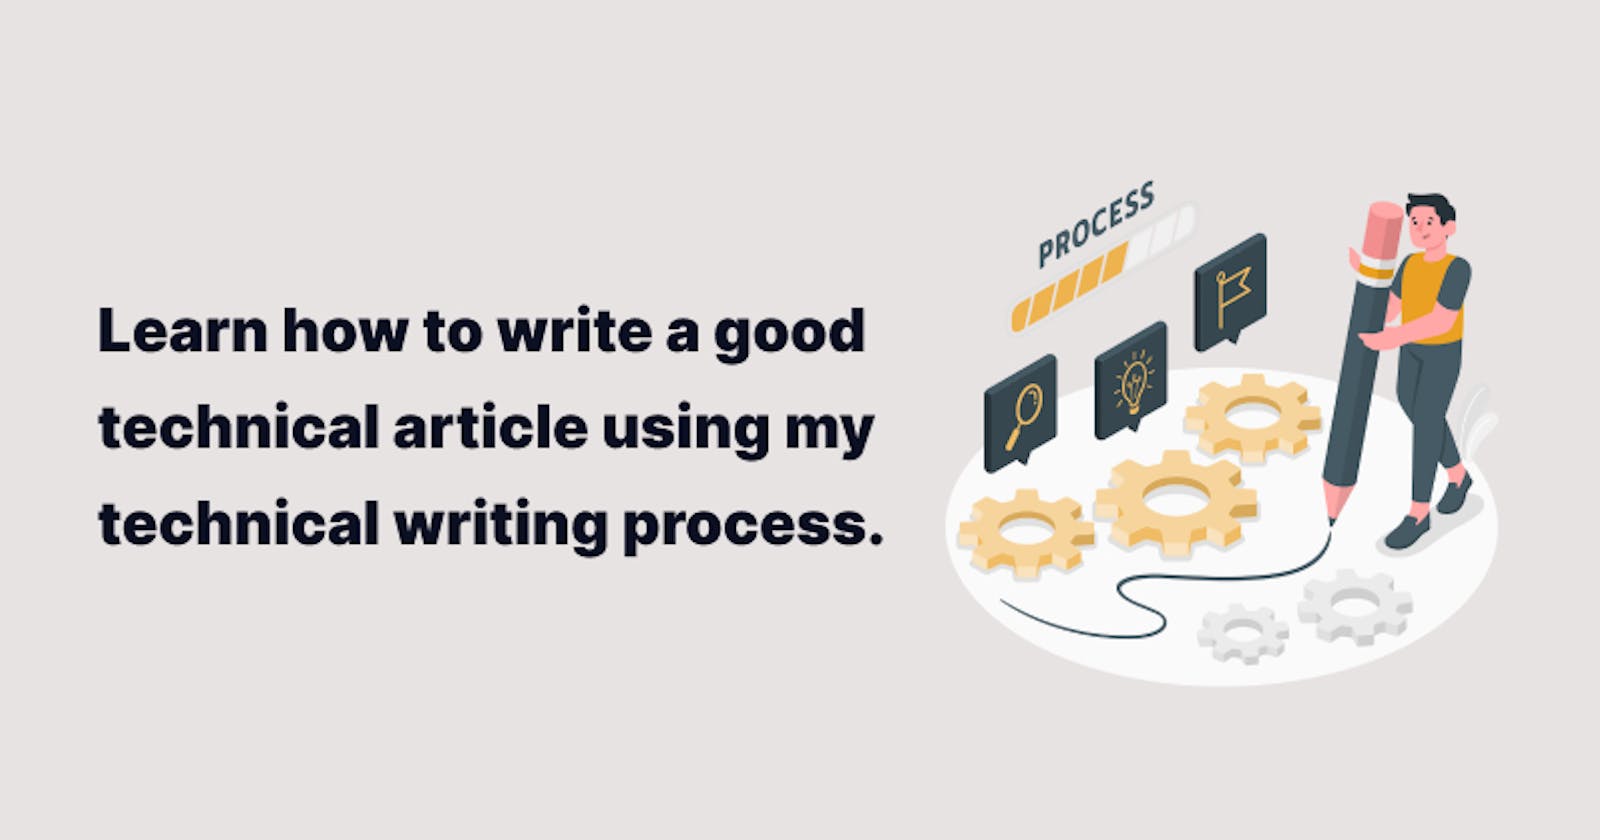 Technical Writing Process: How To Write A Good Technical Article